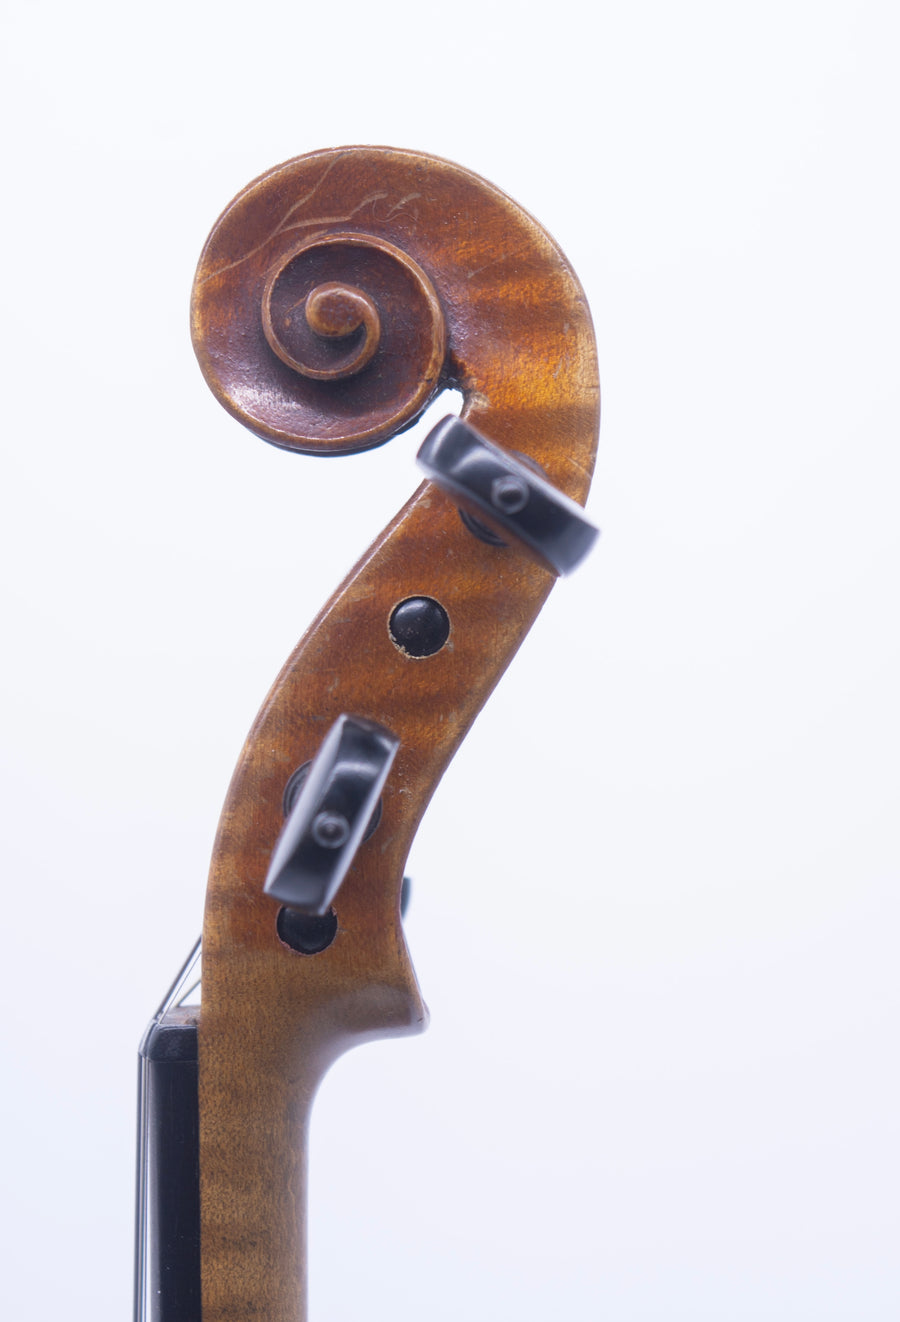 French Duiffoprugar Violin; Made for JTL, c. 1890’s.